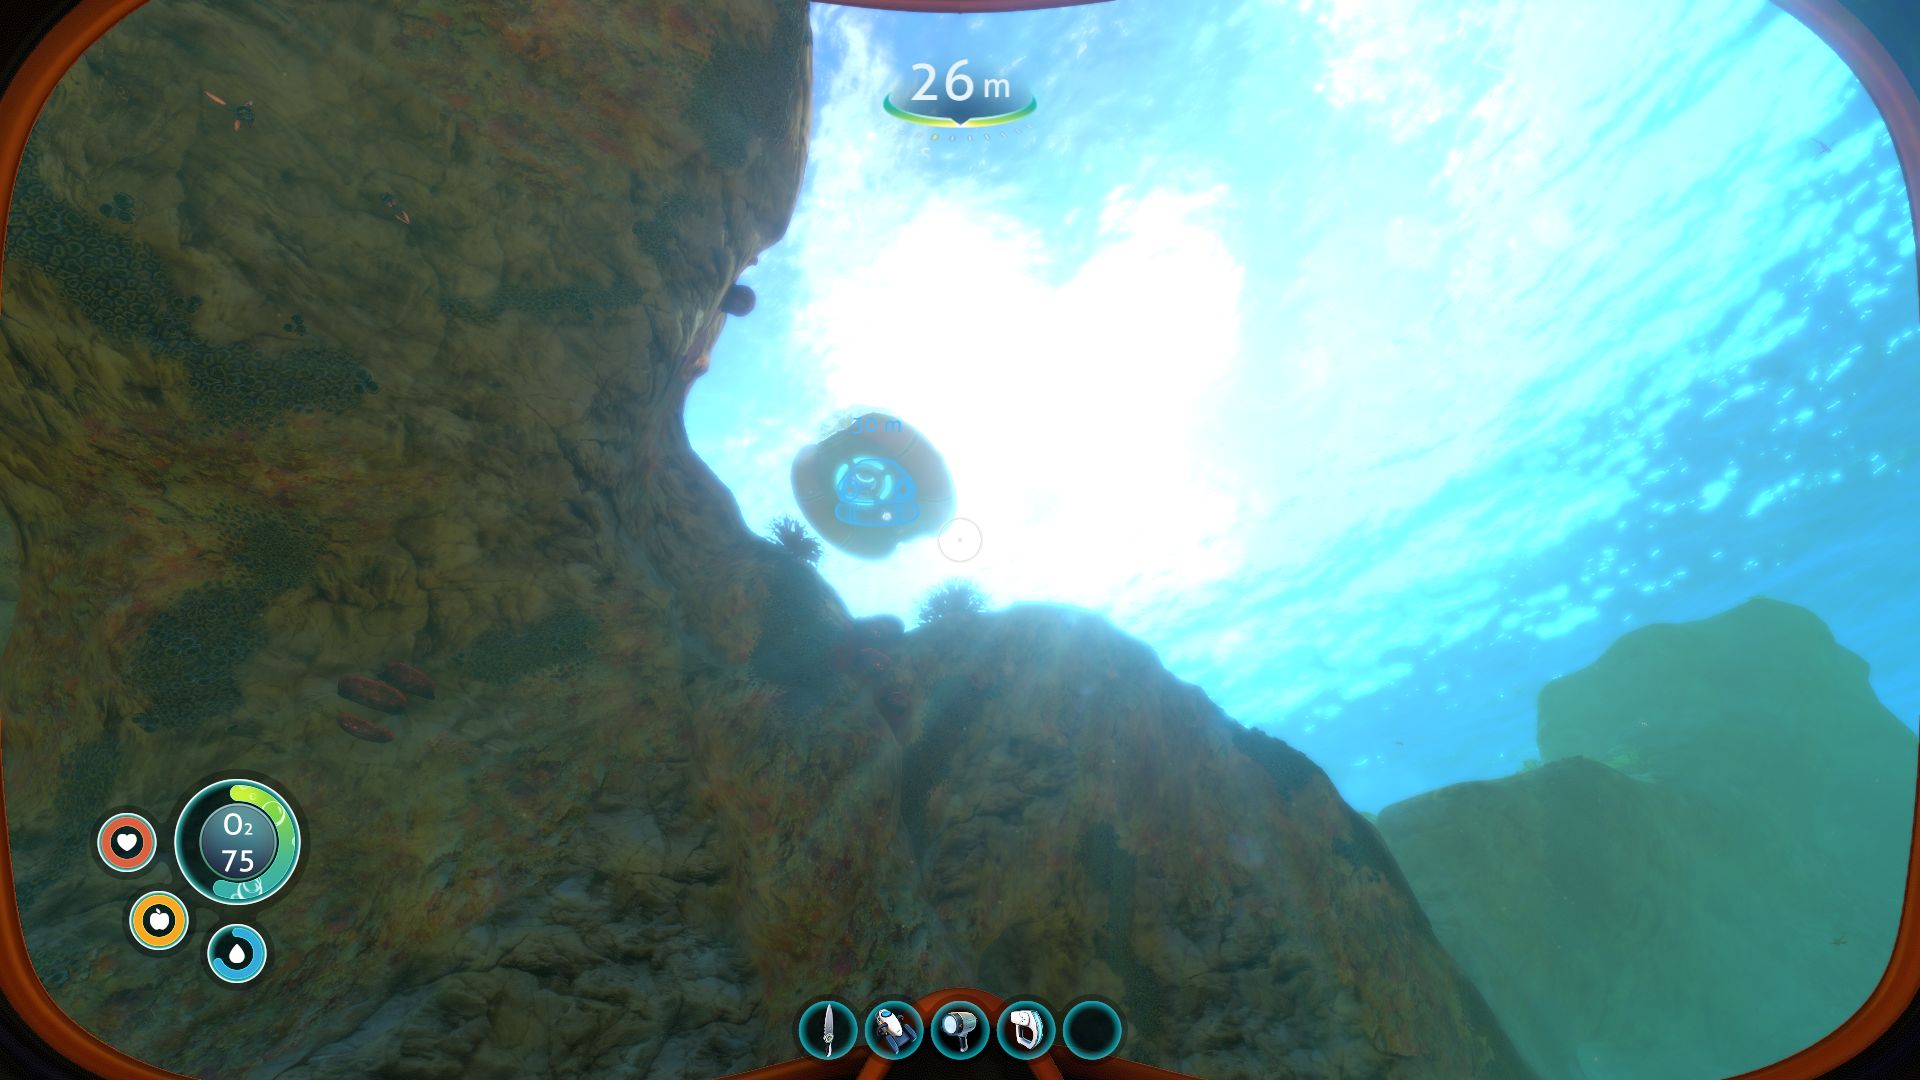 Subnautica, Lifepod 5 from Fish View